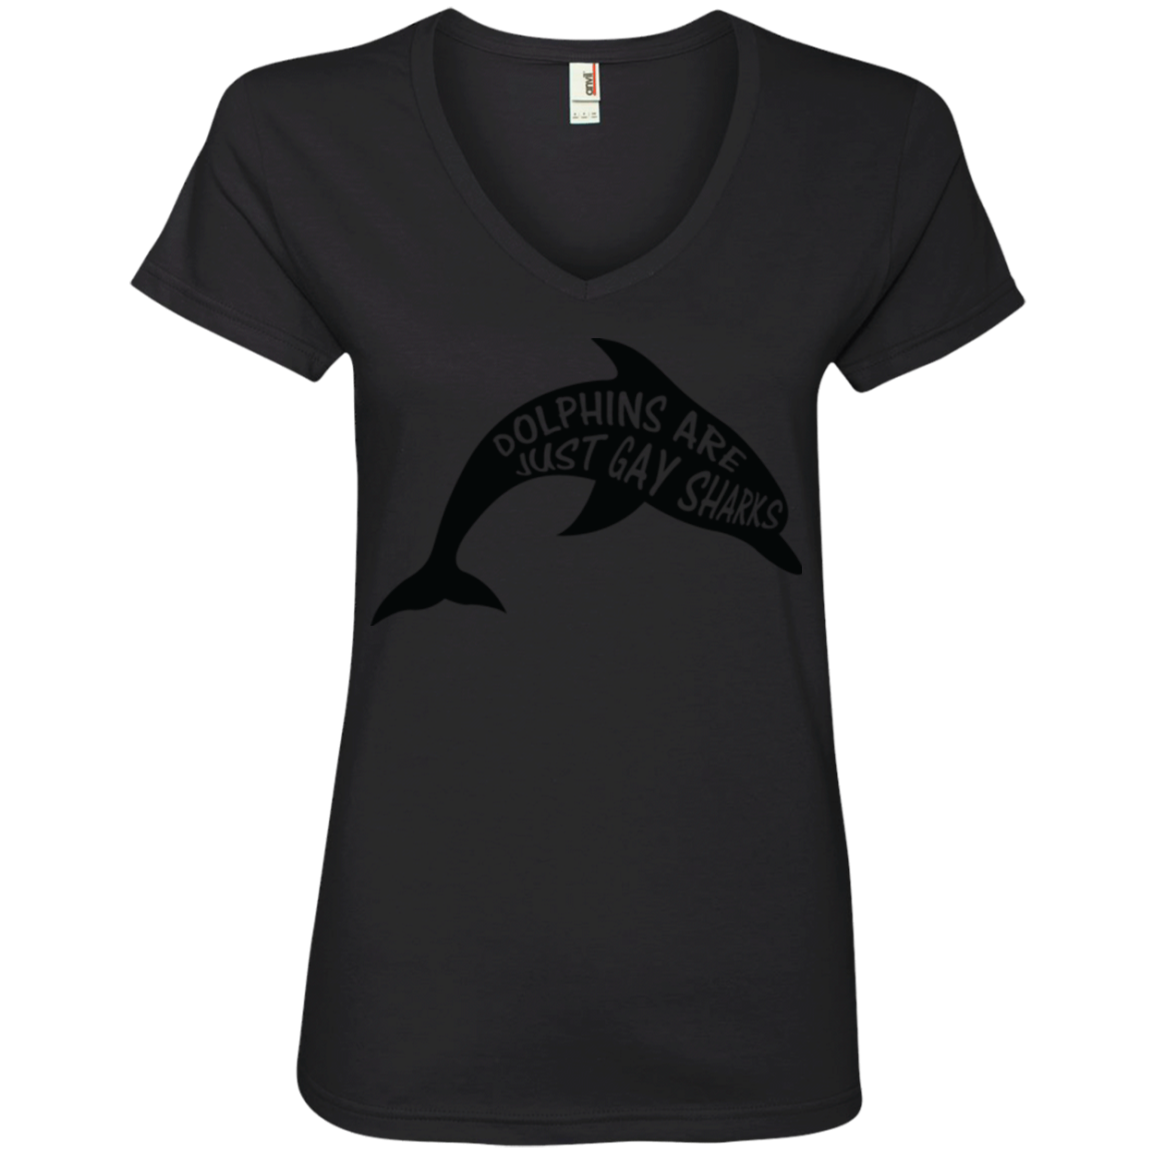 Dolphins are Just Gay Sharks Funny LGBT T Shirt | funny quote LGBT Shirt for Men & Women